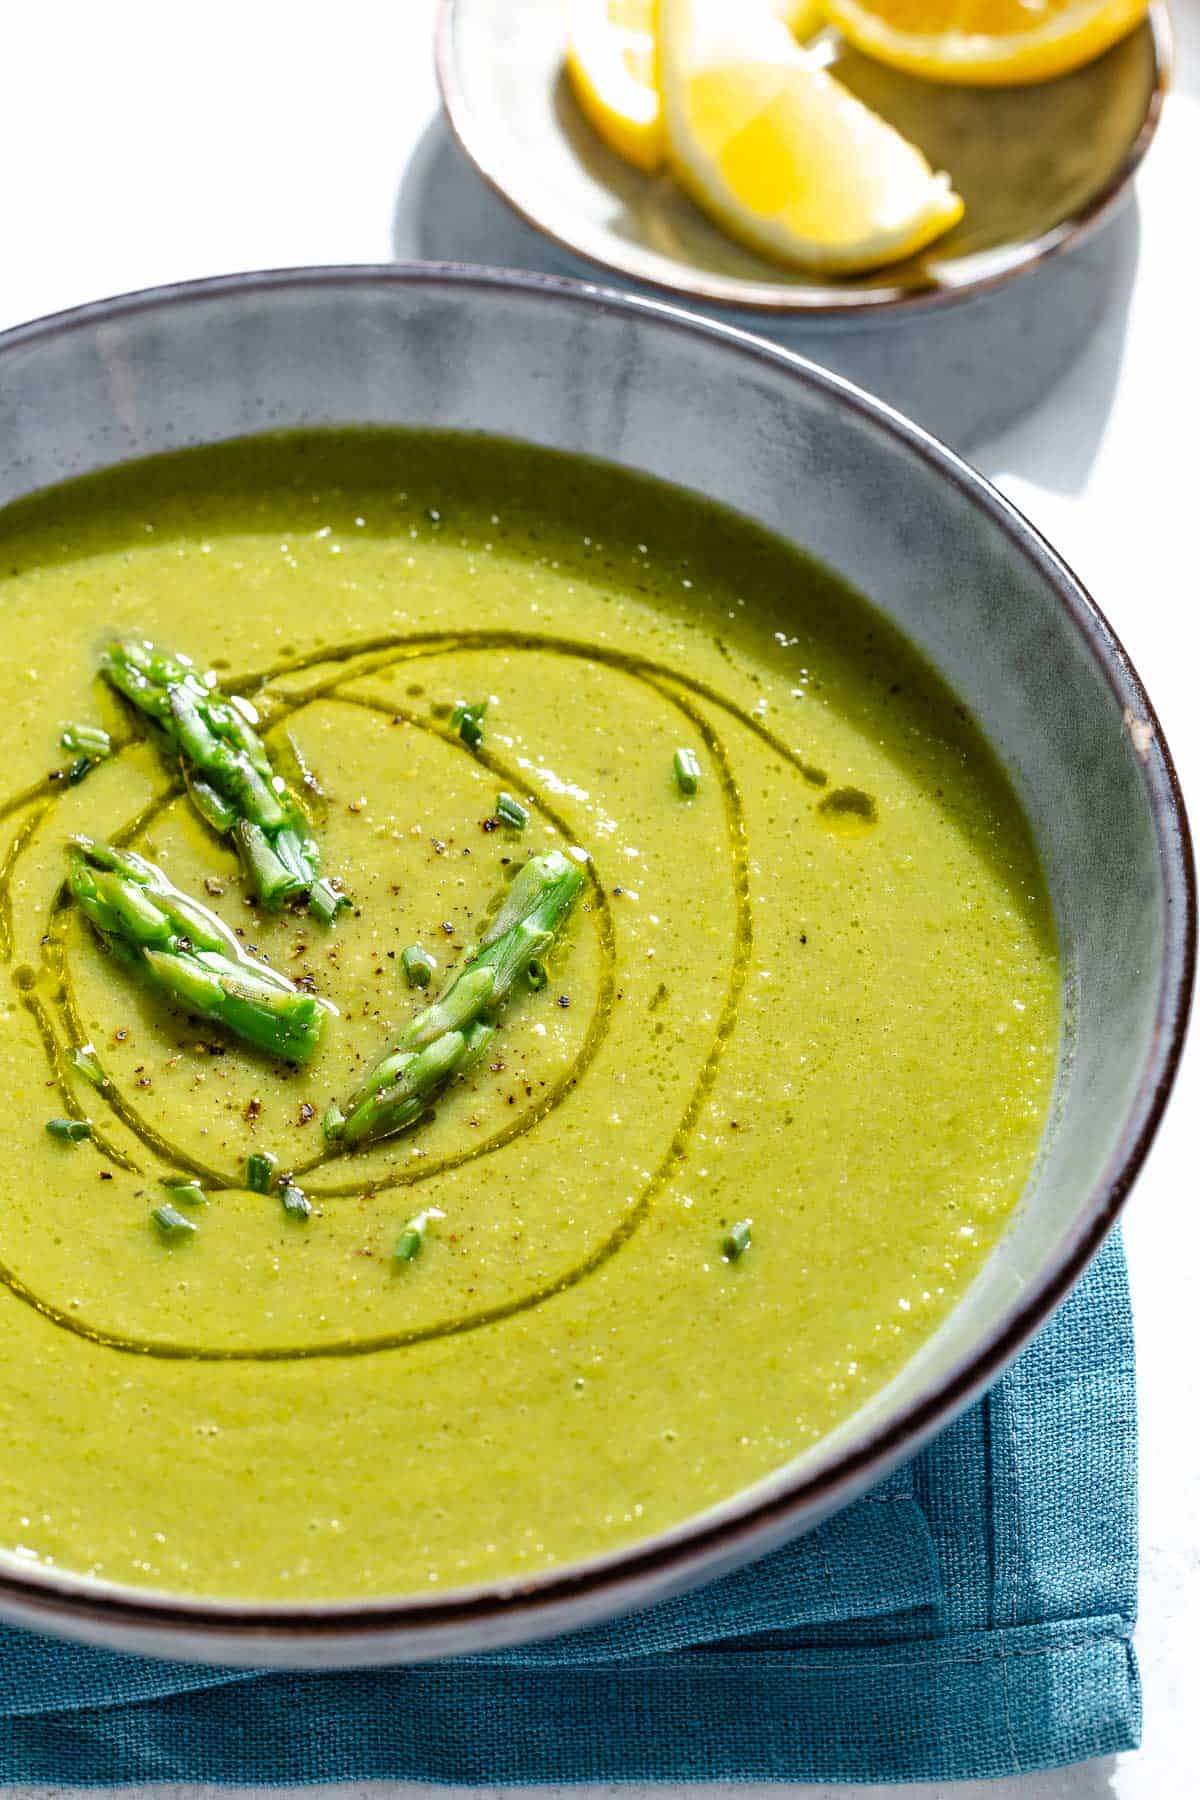 A close up of a bowl of asparagus soup. Next to this is a small plate of lemon wedges.